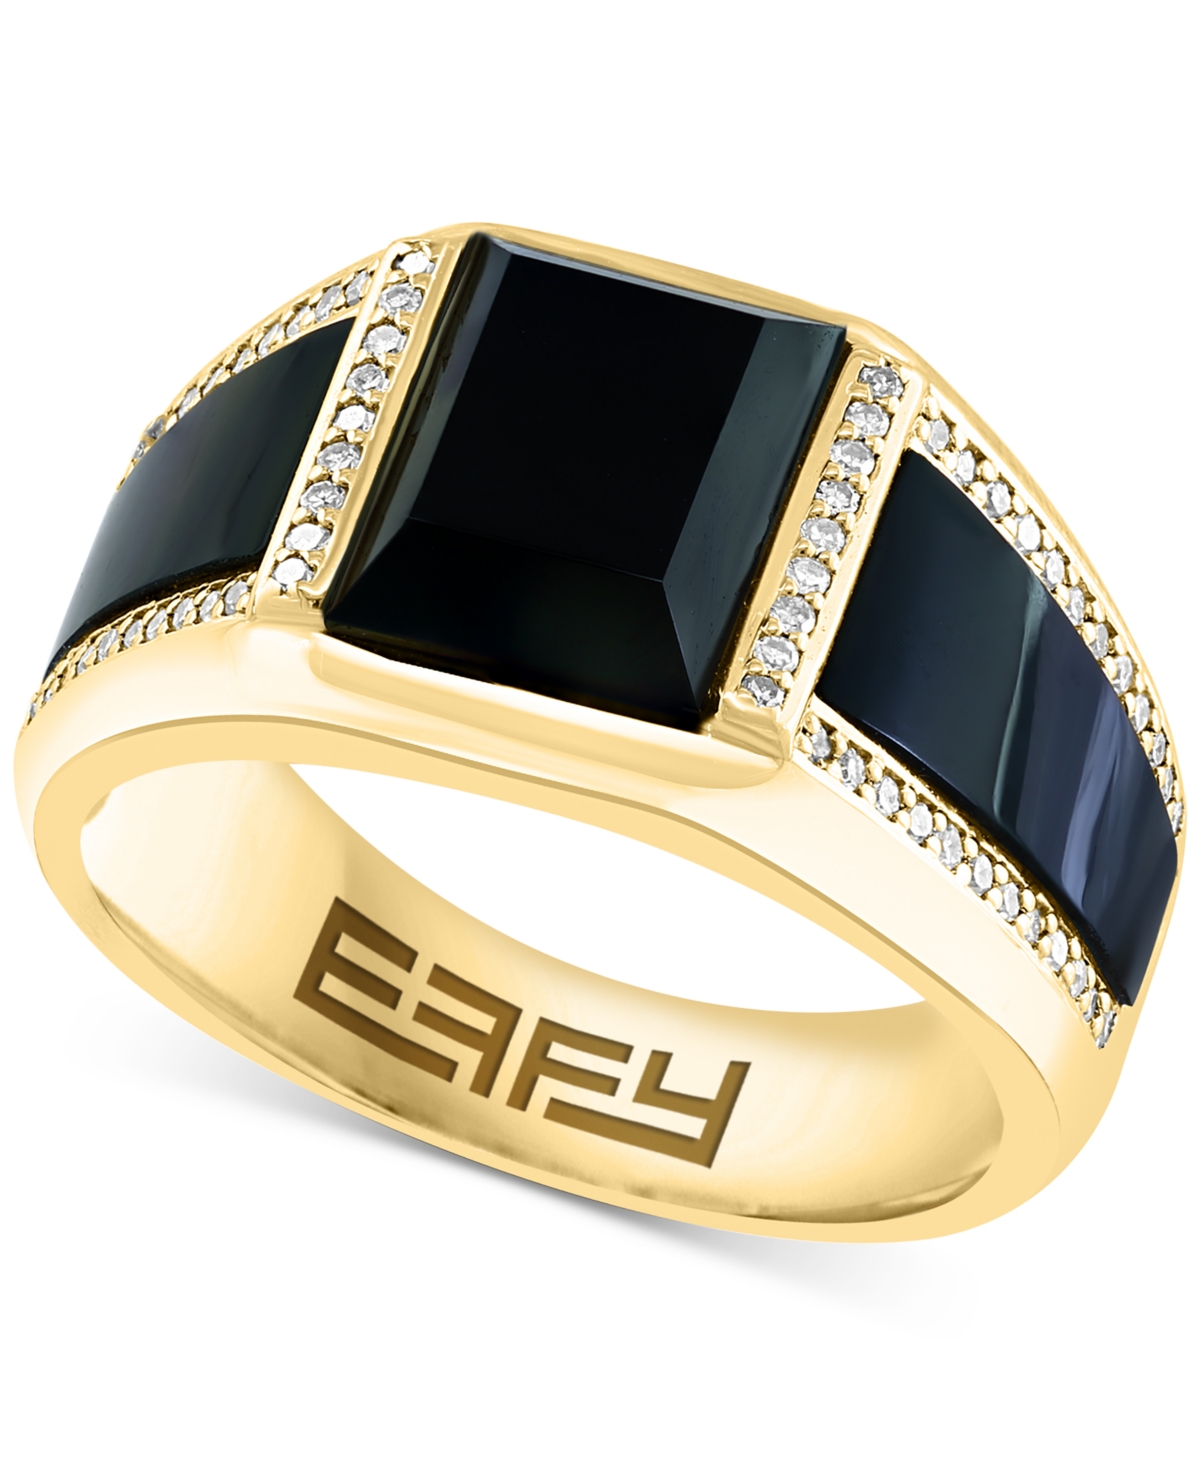 Effy Men's Onyx & Diamond (1/4 ct. t.w.) Ring in 14k Gold-Plated Sterling Silver - Gold Over Silver